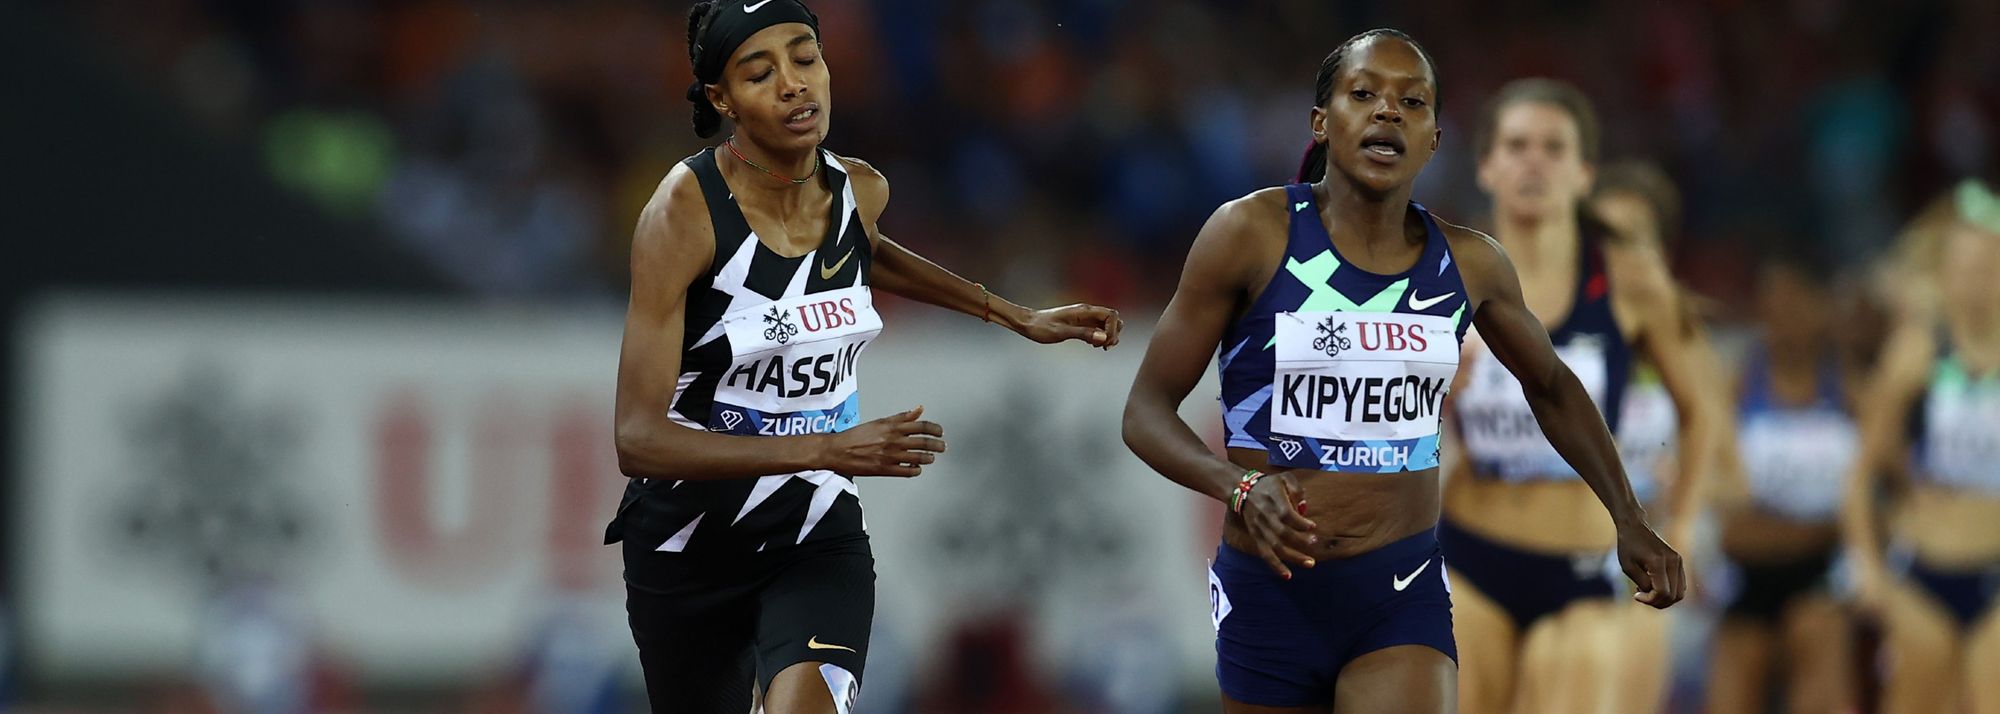 The women's 1500m final had the makings of an all-time classic.